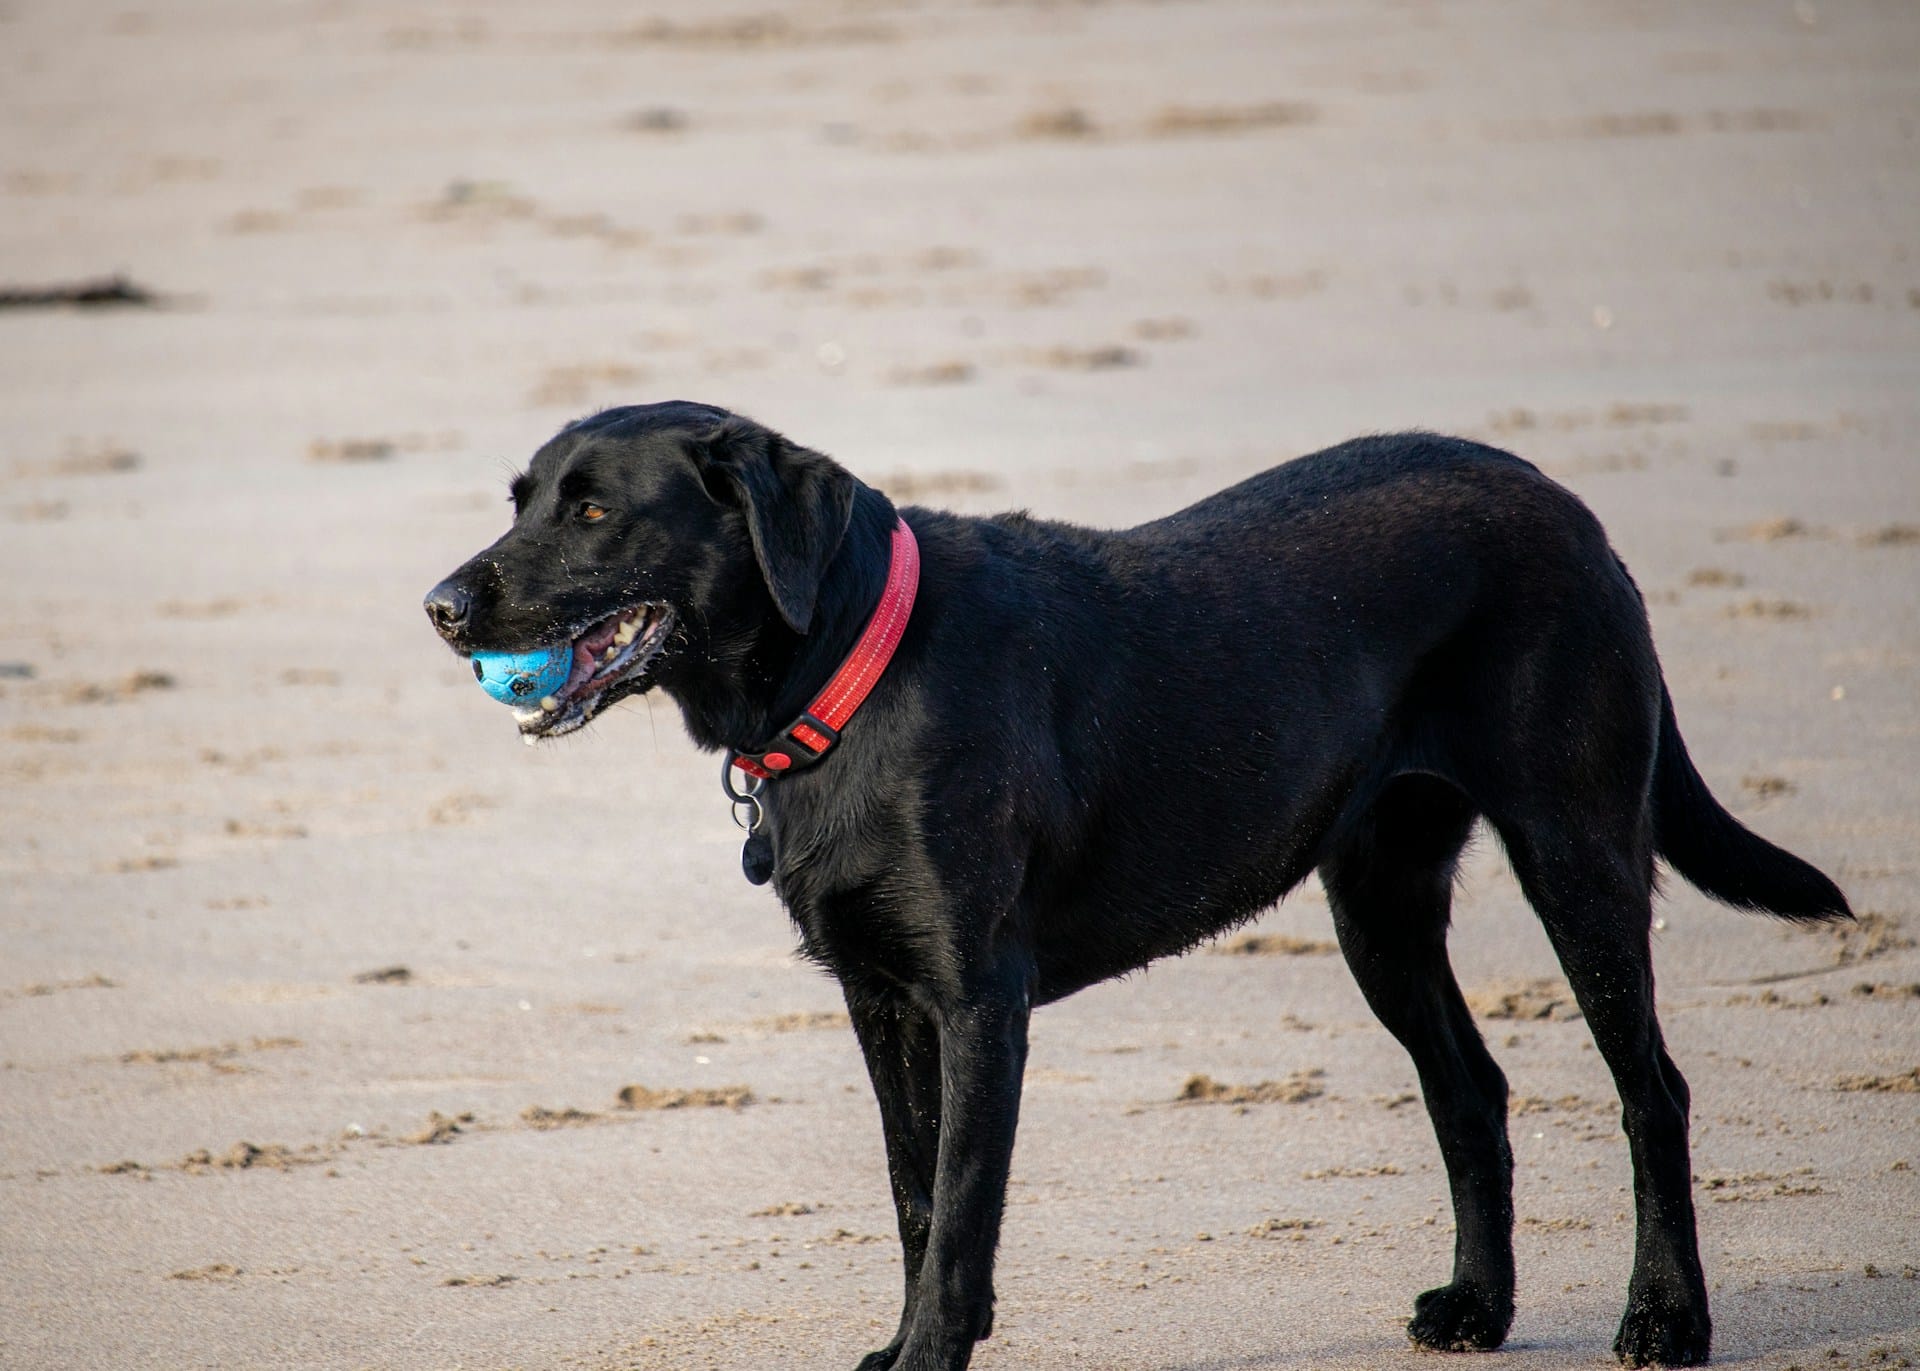 Black Labrador with a ball in its mouth on the sand at the beach